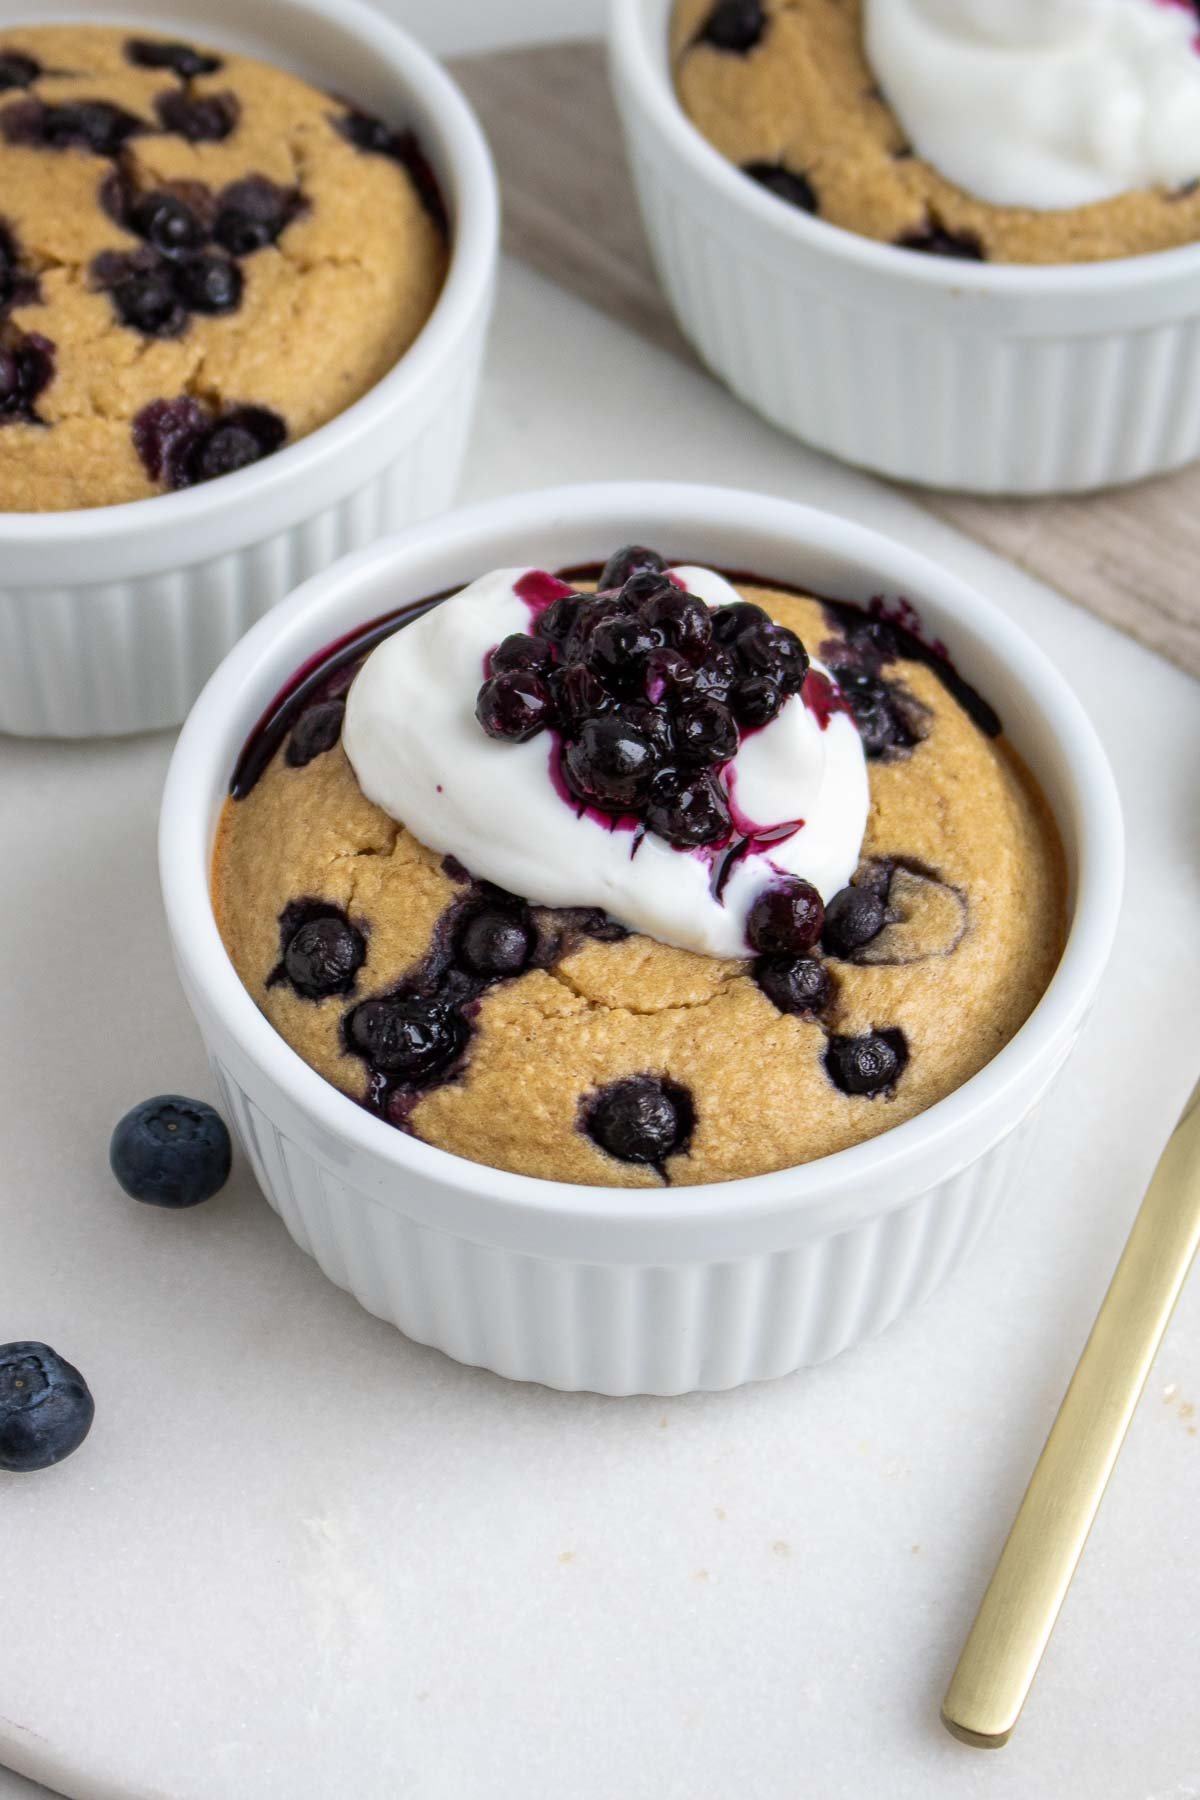 Ramekin with baked blended oats topped with Greek yogurt and blueberries